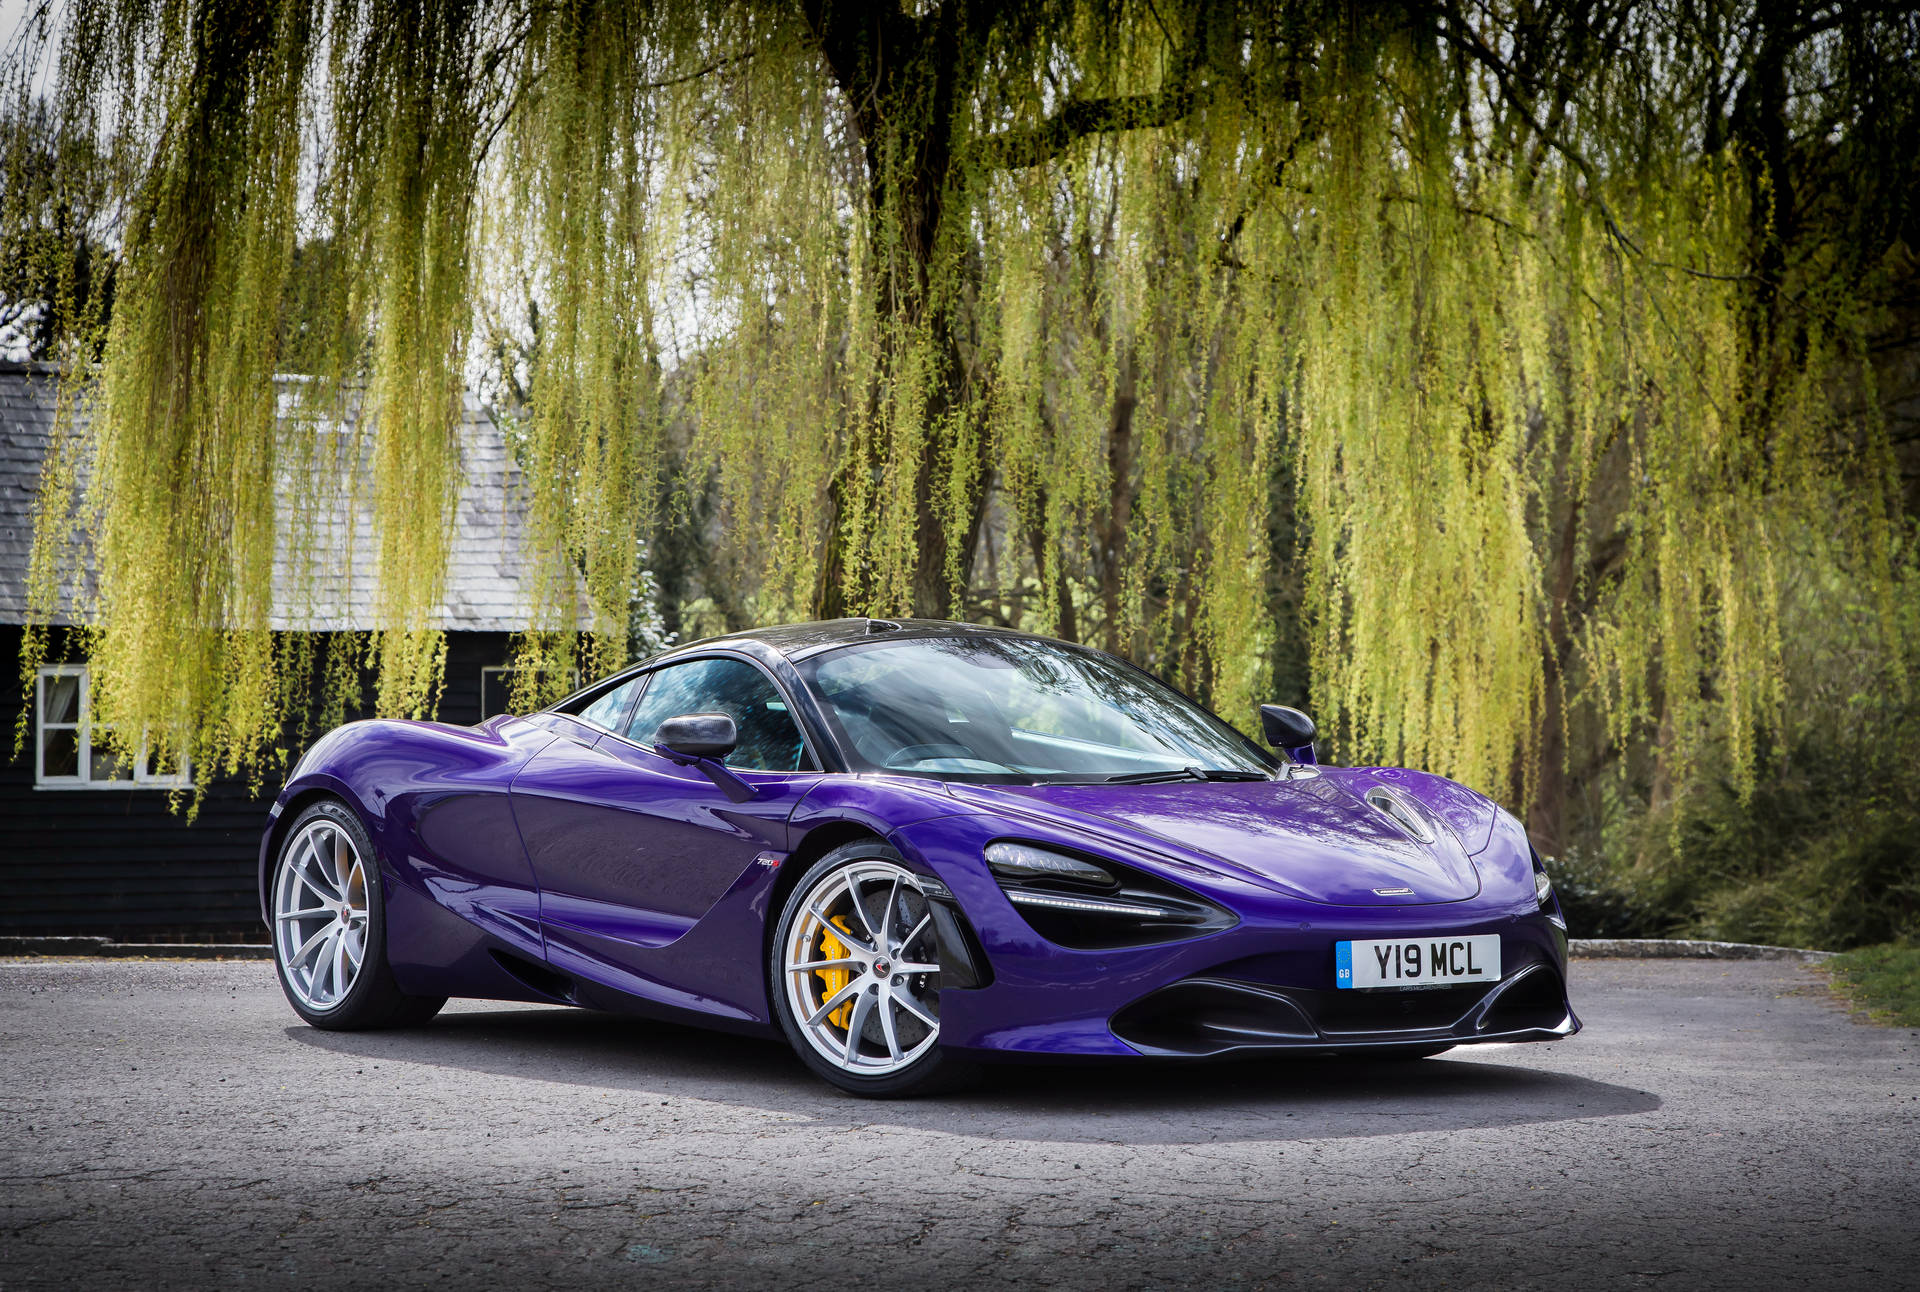 Showcasing Power And Luxury: The Stunning Mclaren 720s In Violet